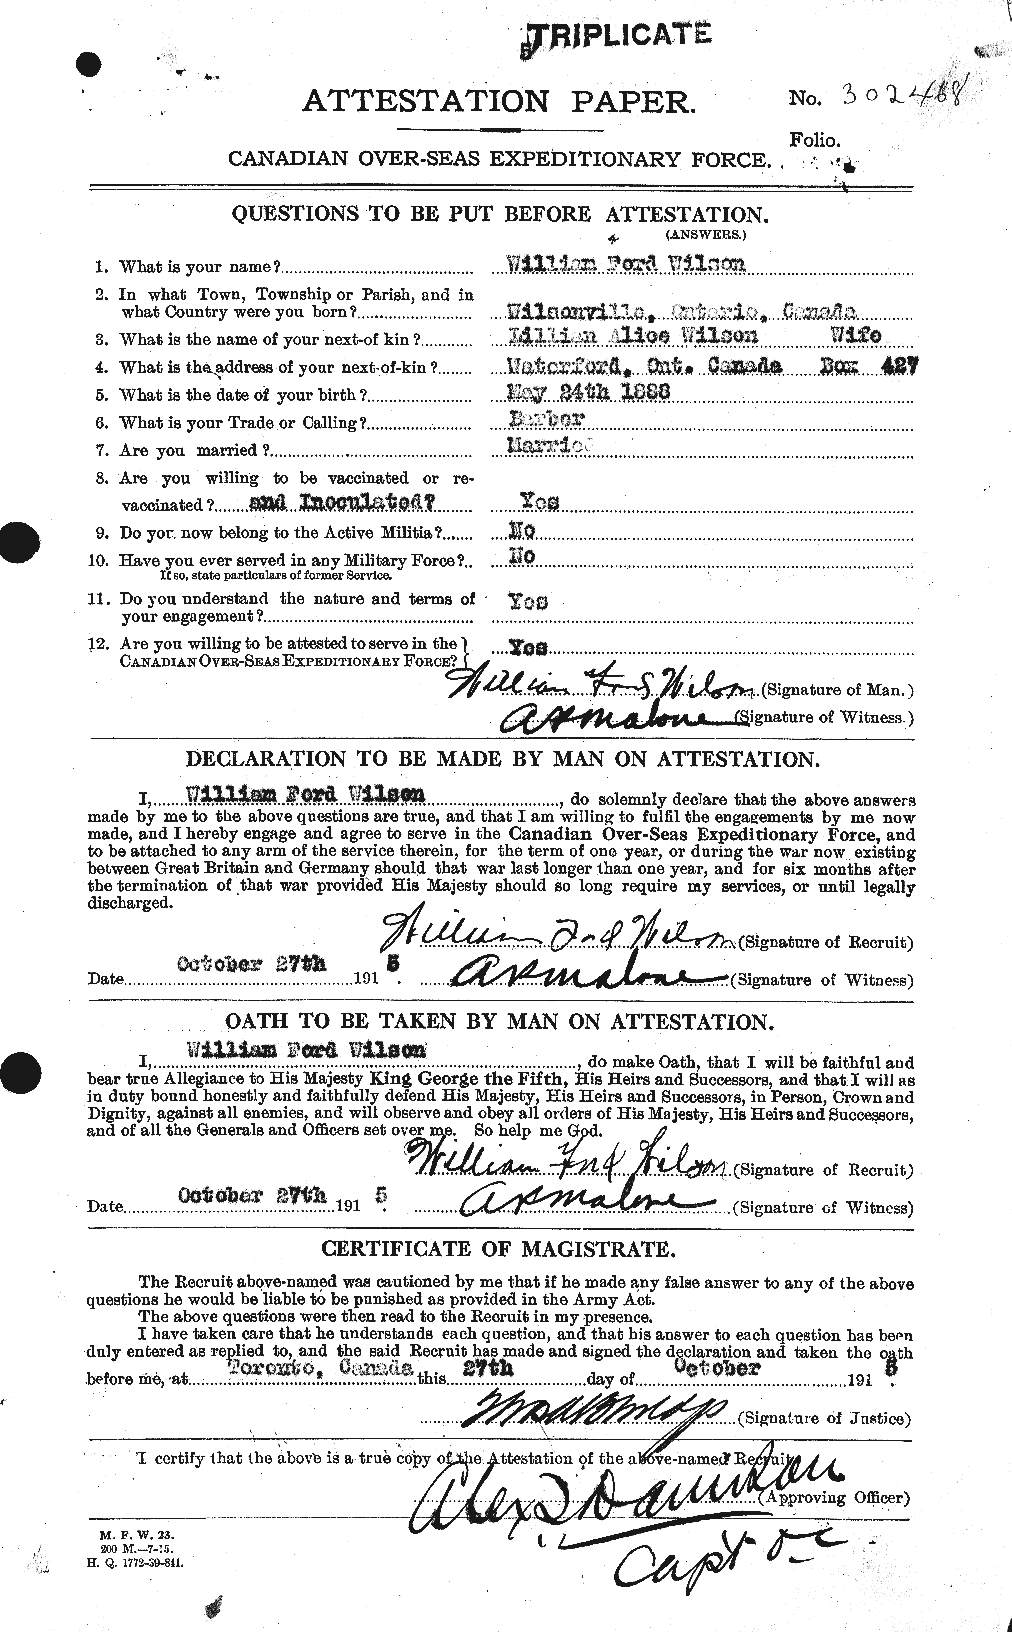 Personnel Records of the First World War - CEF 681989a